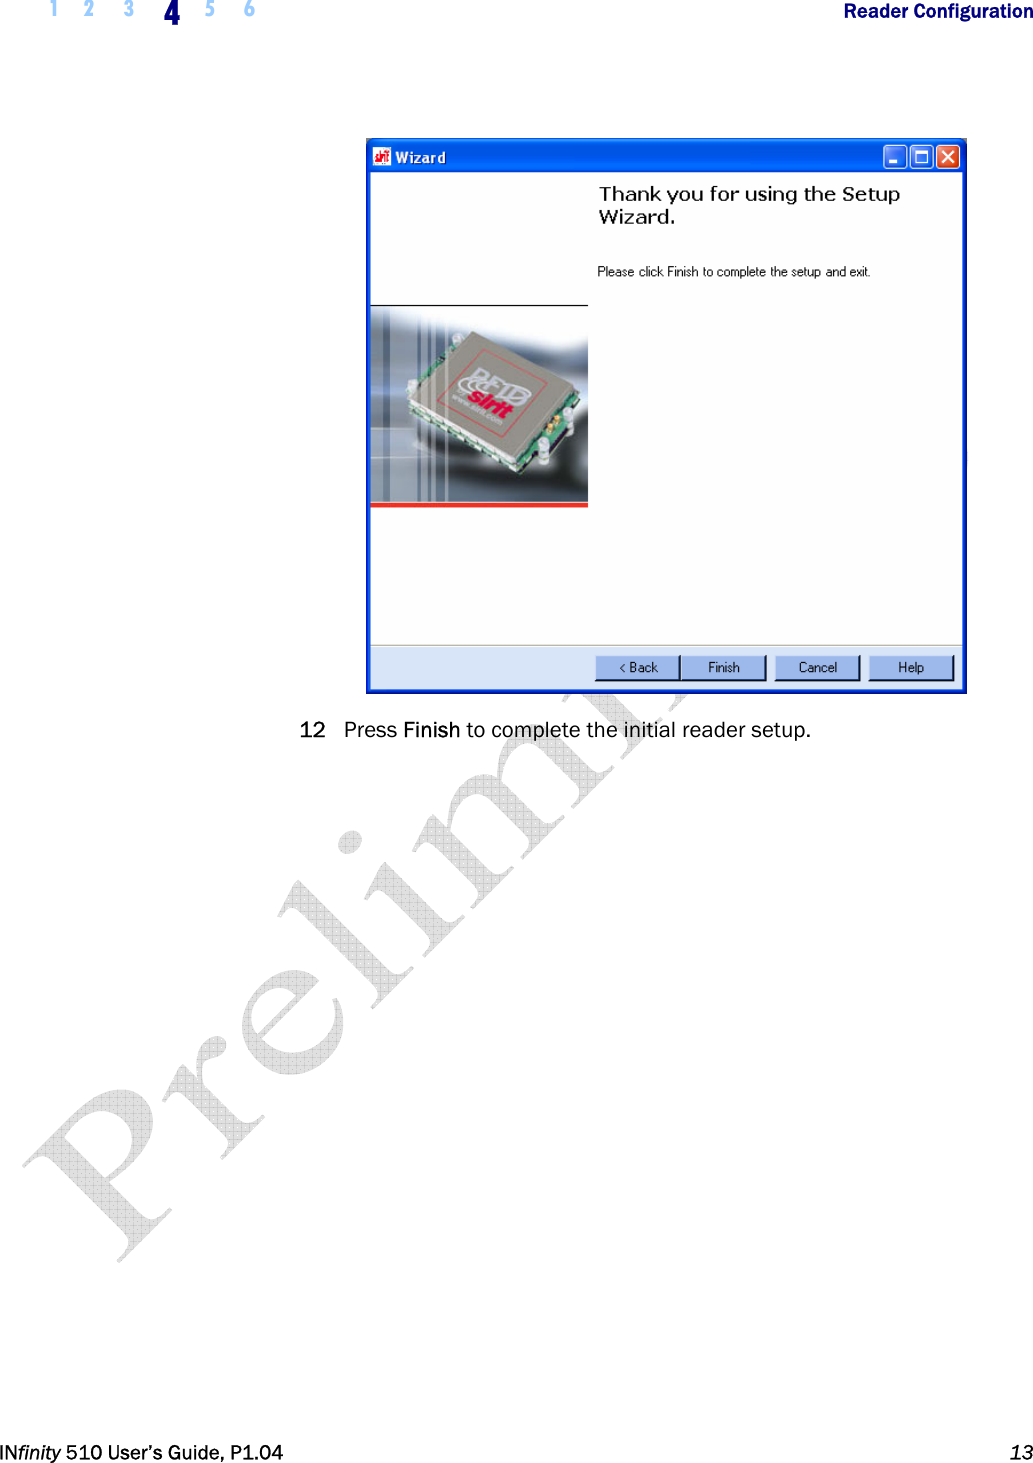  1 2  3  4  5 6           Reader Configuration   INfinity 510 User’s Guide, P1.04  13   12 Press Finish to complete the initial reader setup.  